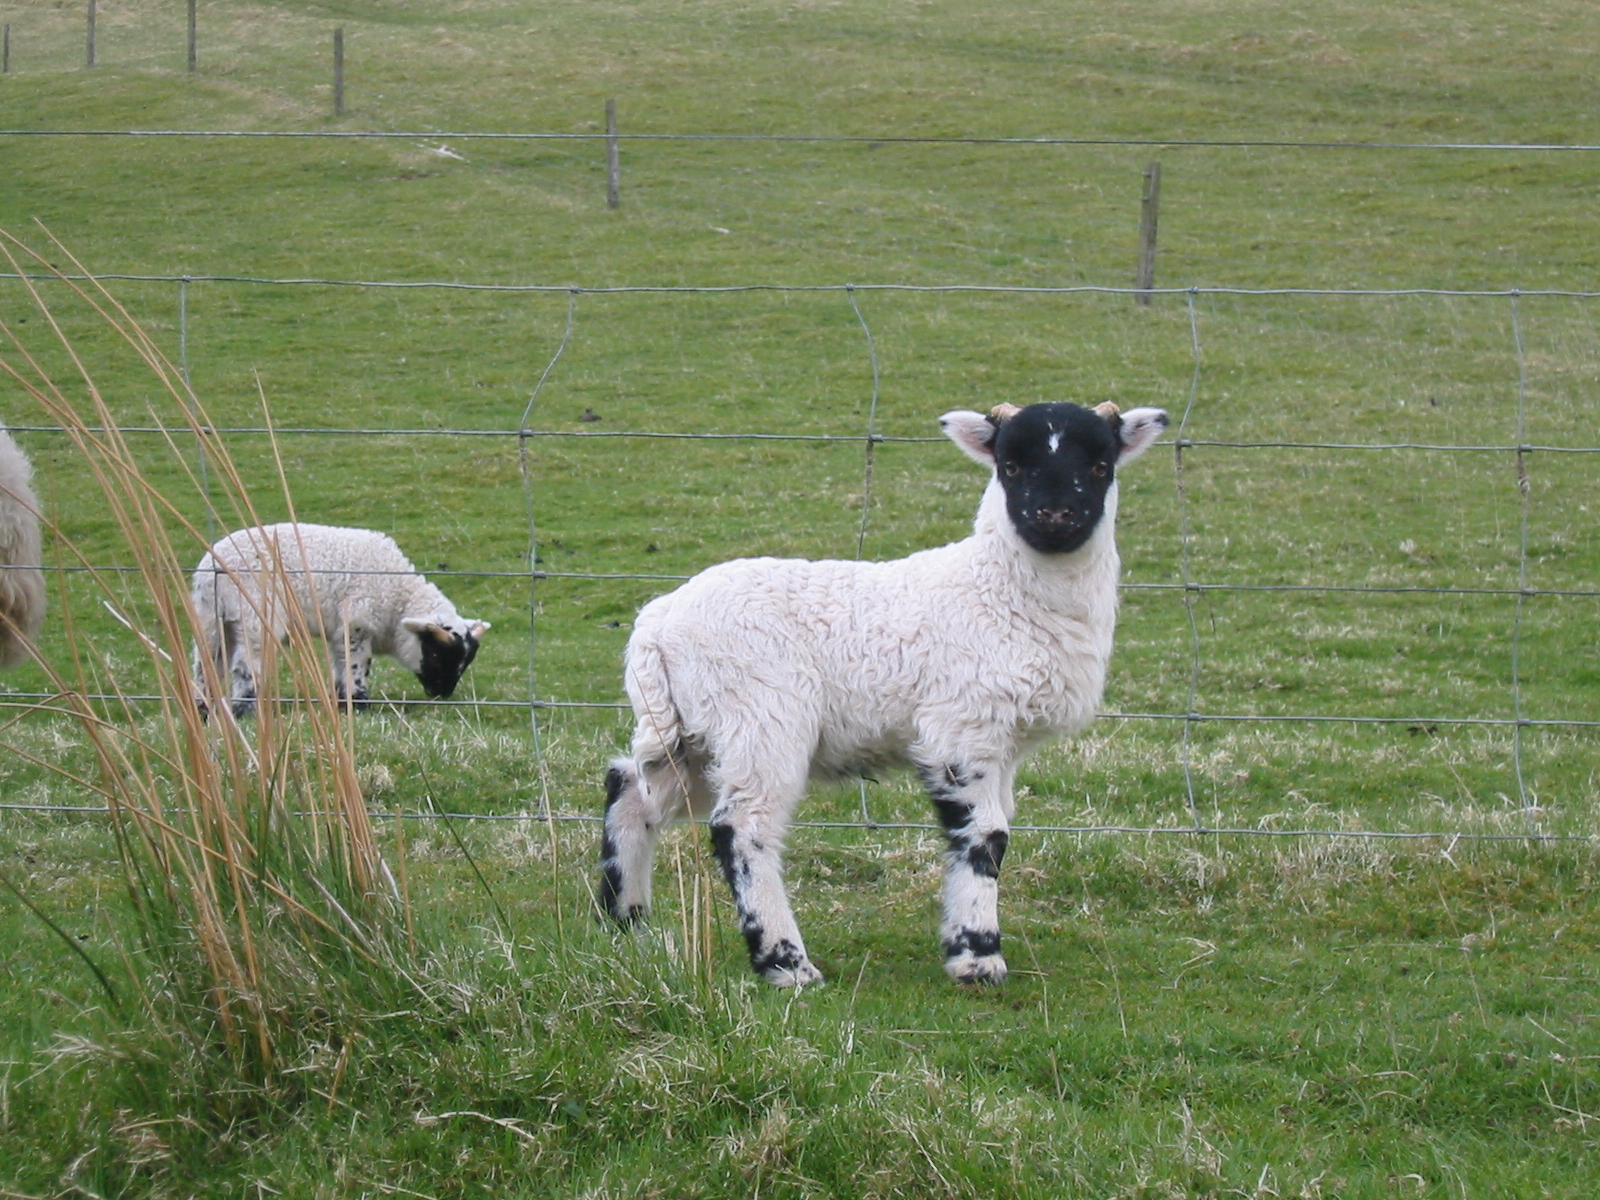 three sheep standing in the grass by a fence